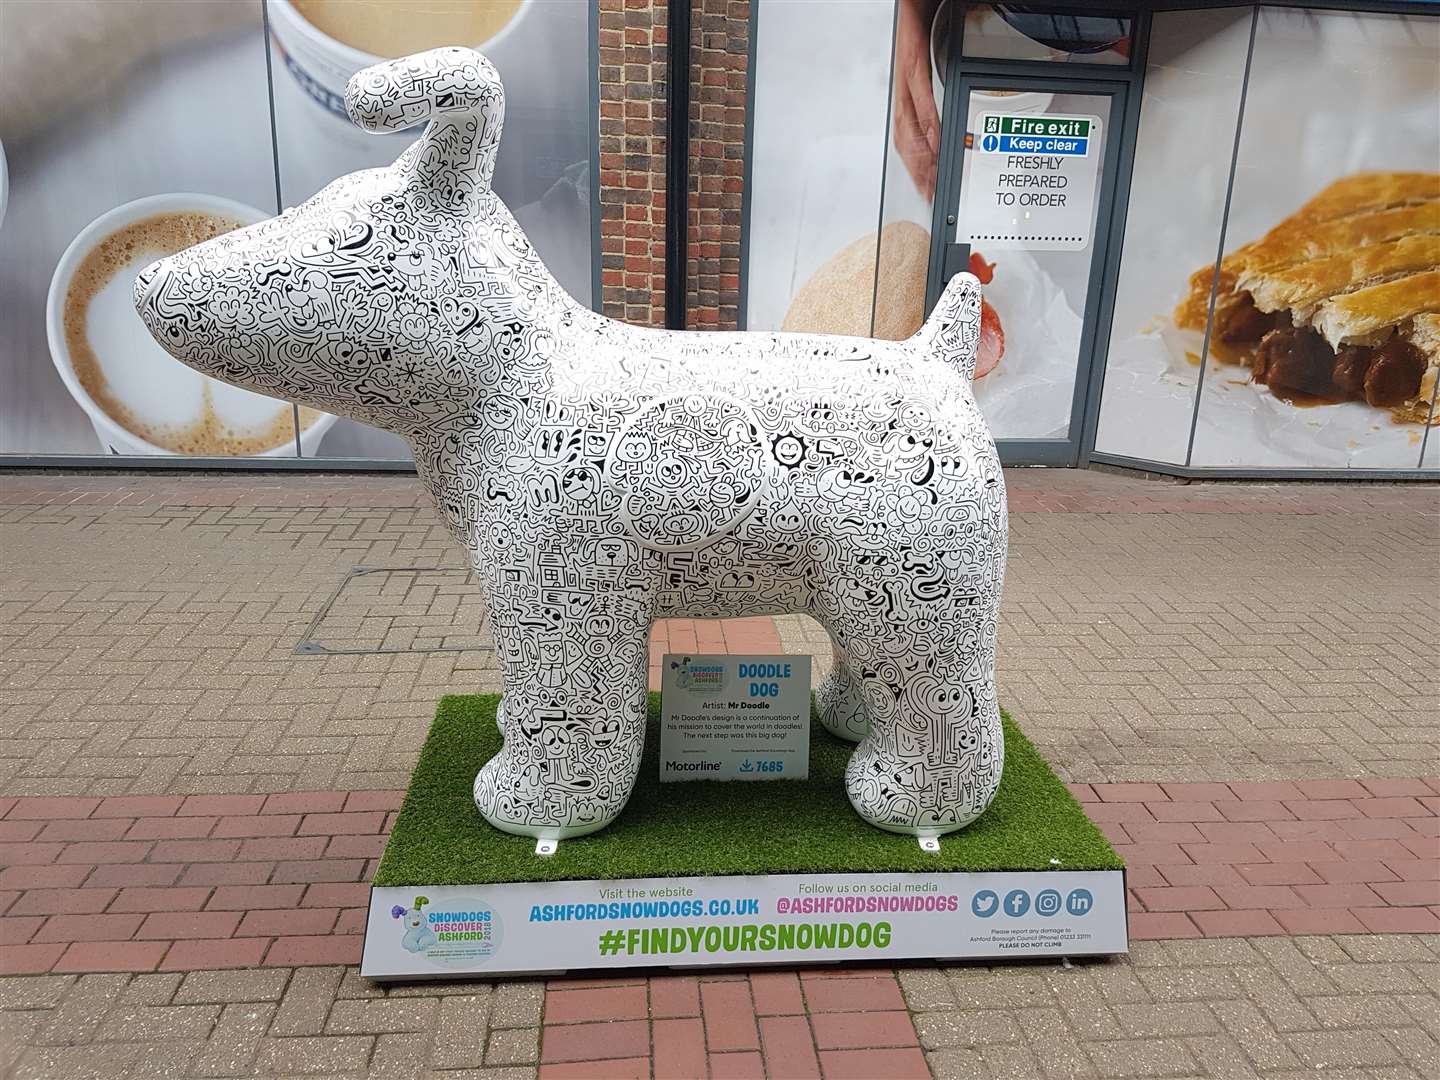 Internationally-renowned artist Mr Doodle decorated this dog live in public before it was put on display